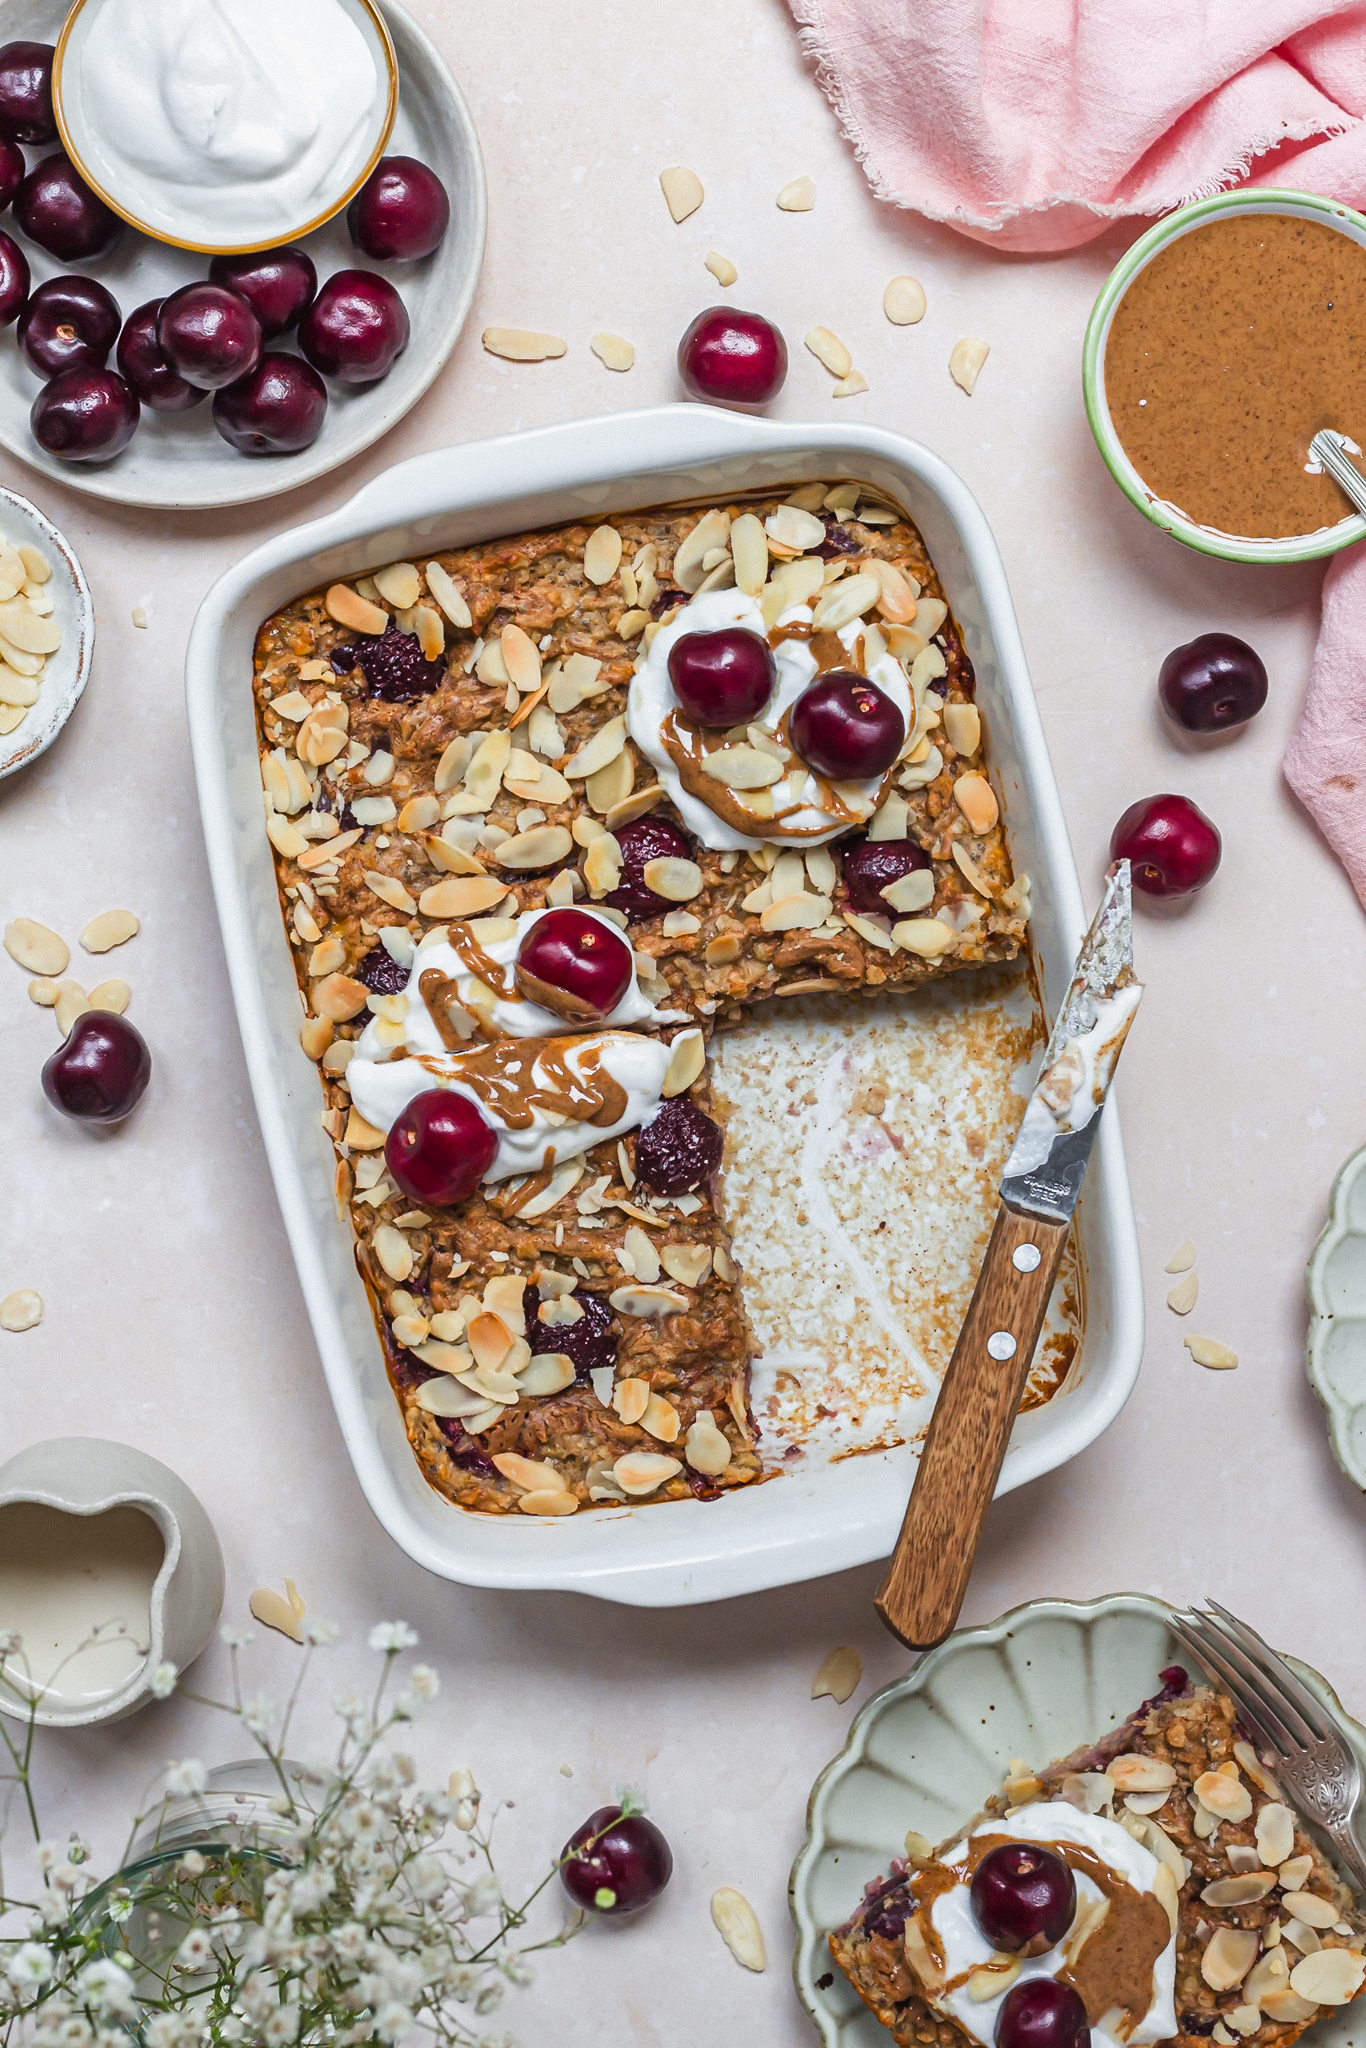 A dish of Cherry Almond Baked Oats with one slice removed